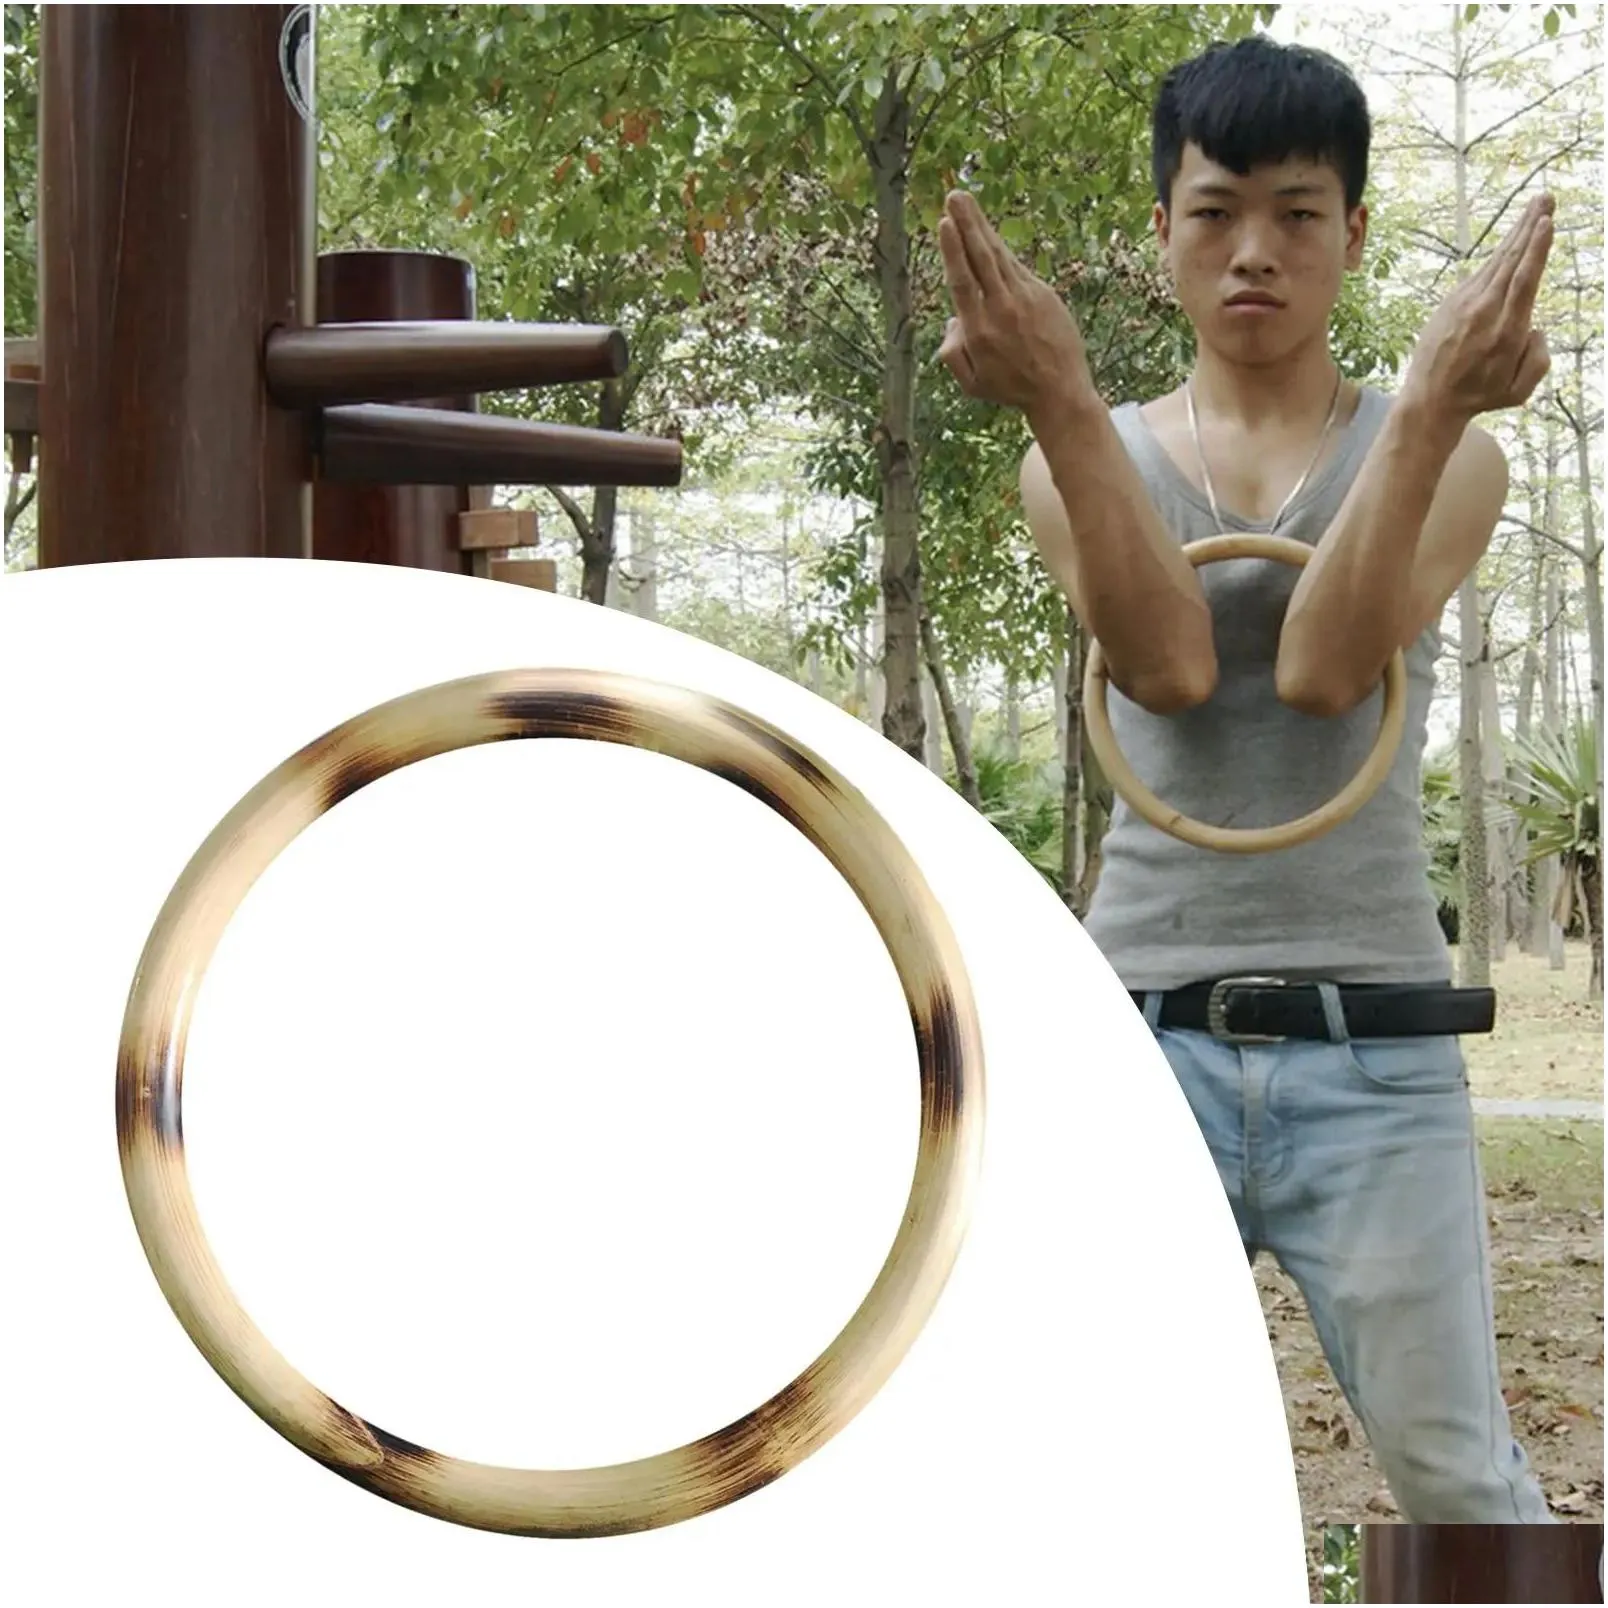 Arts Durable Wing Chun Rattan Sticky Hand Strength Training Equipment Devices Wing Kung Fu for Fitness Tai Women Men